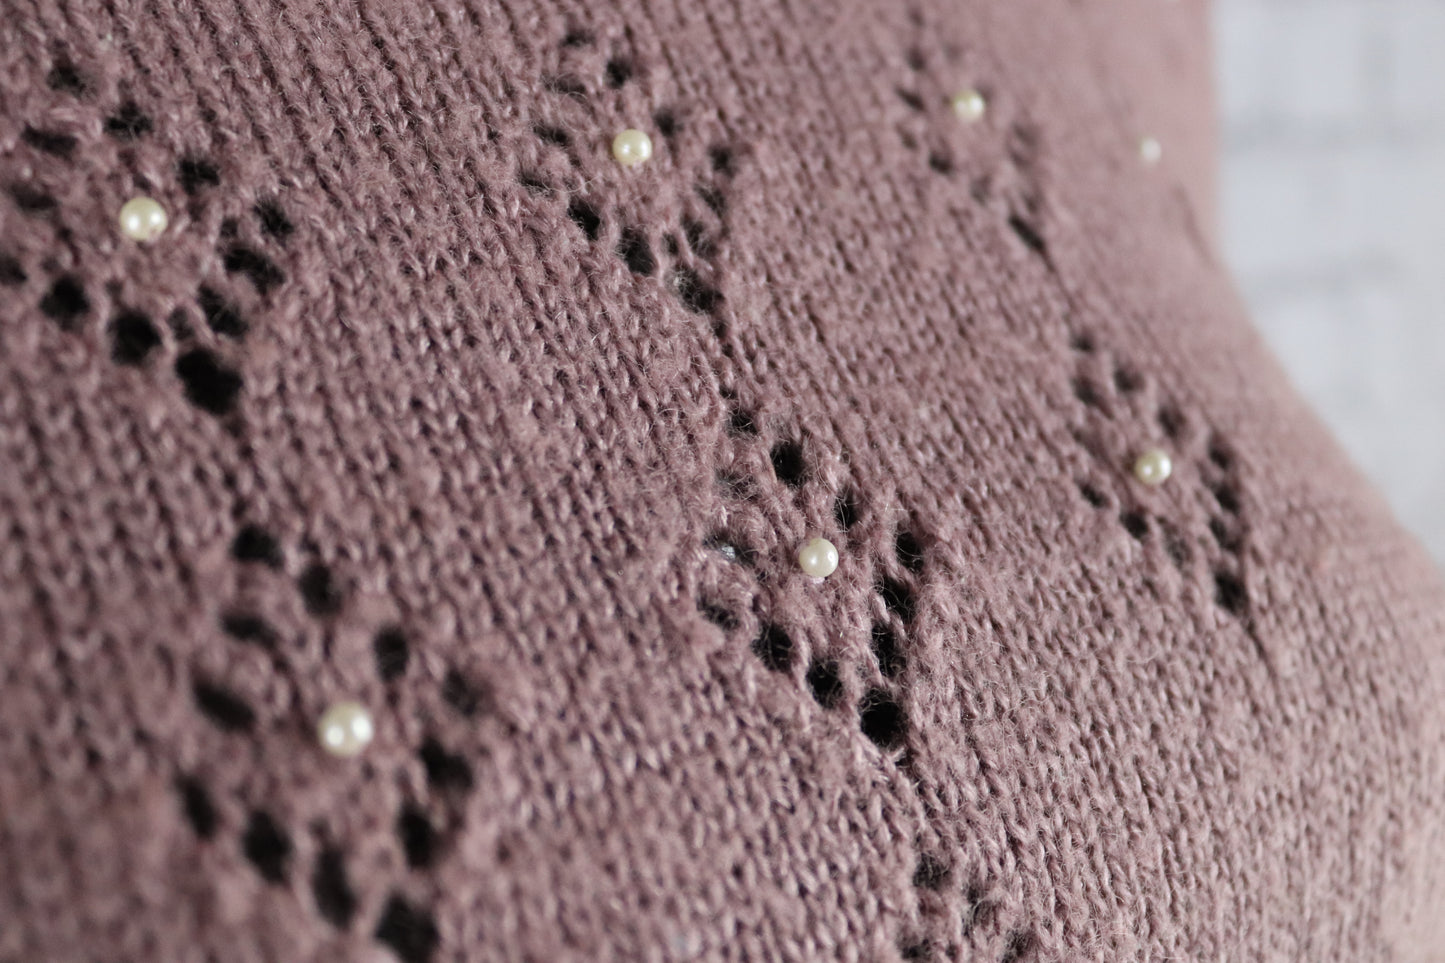 1970's Vintage Purple Sweater with Pearl Detailing